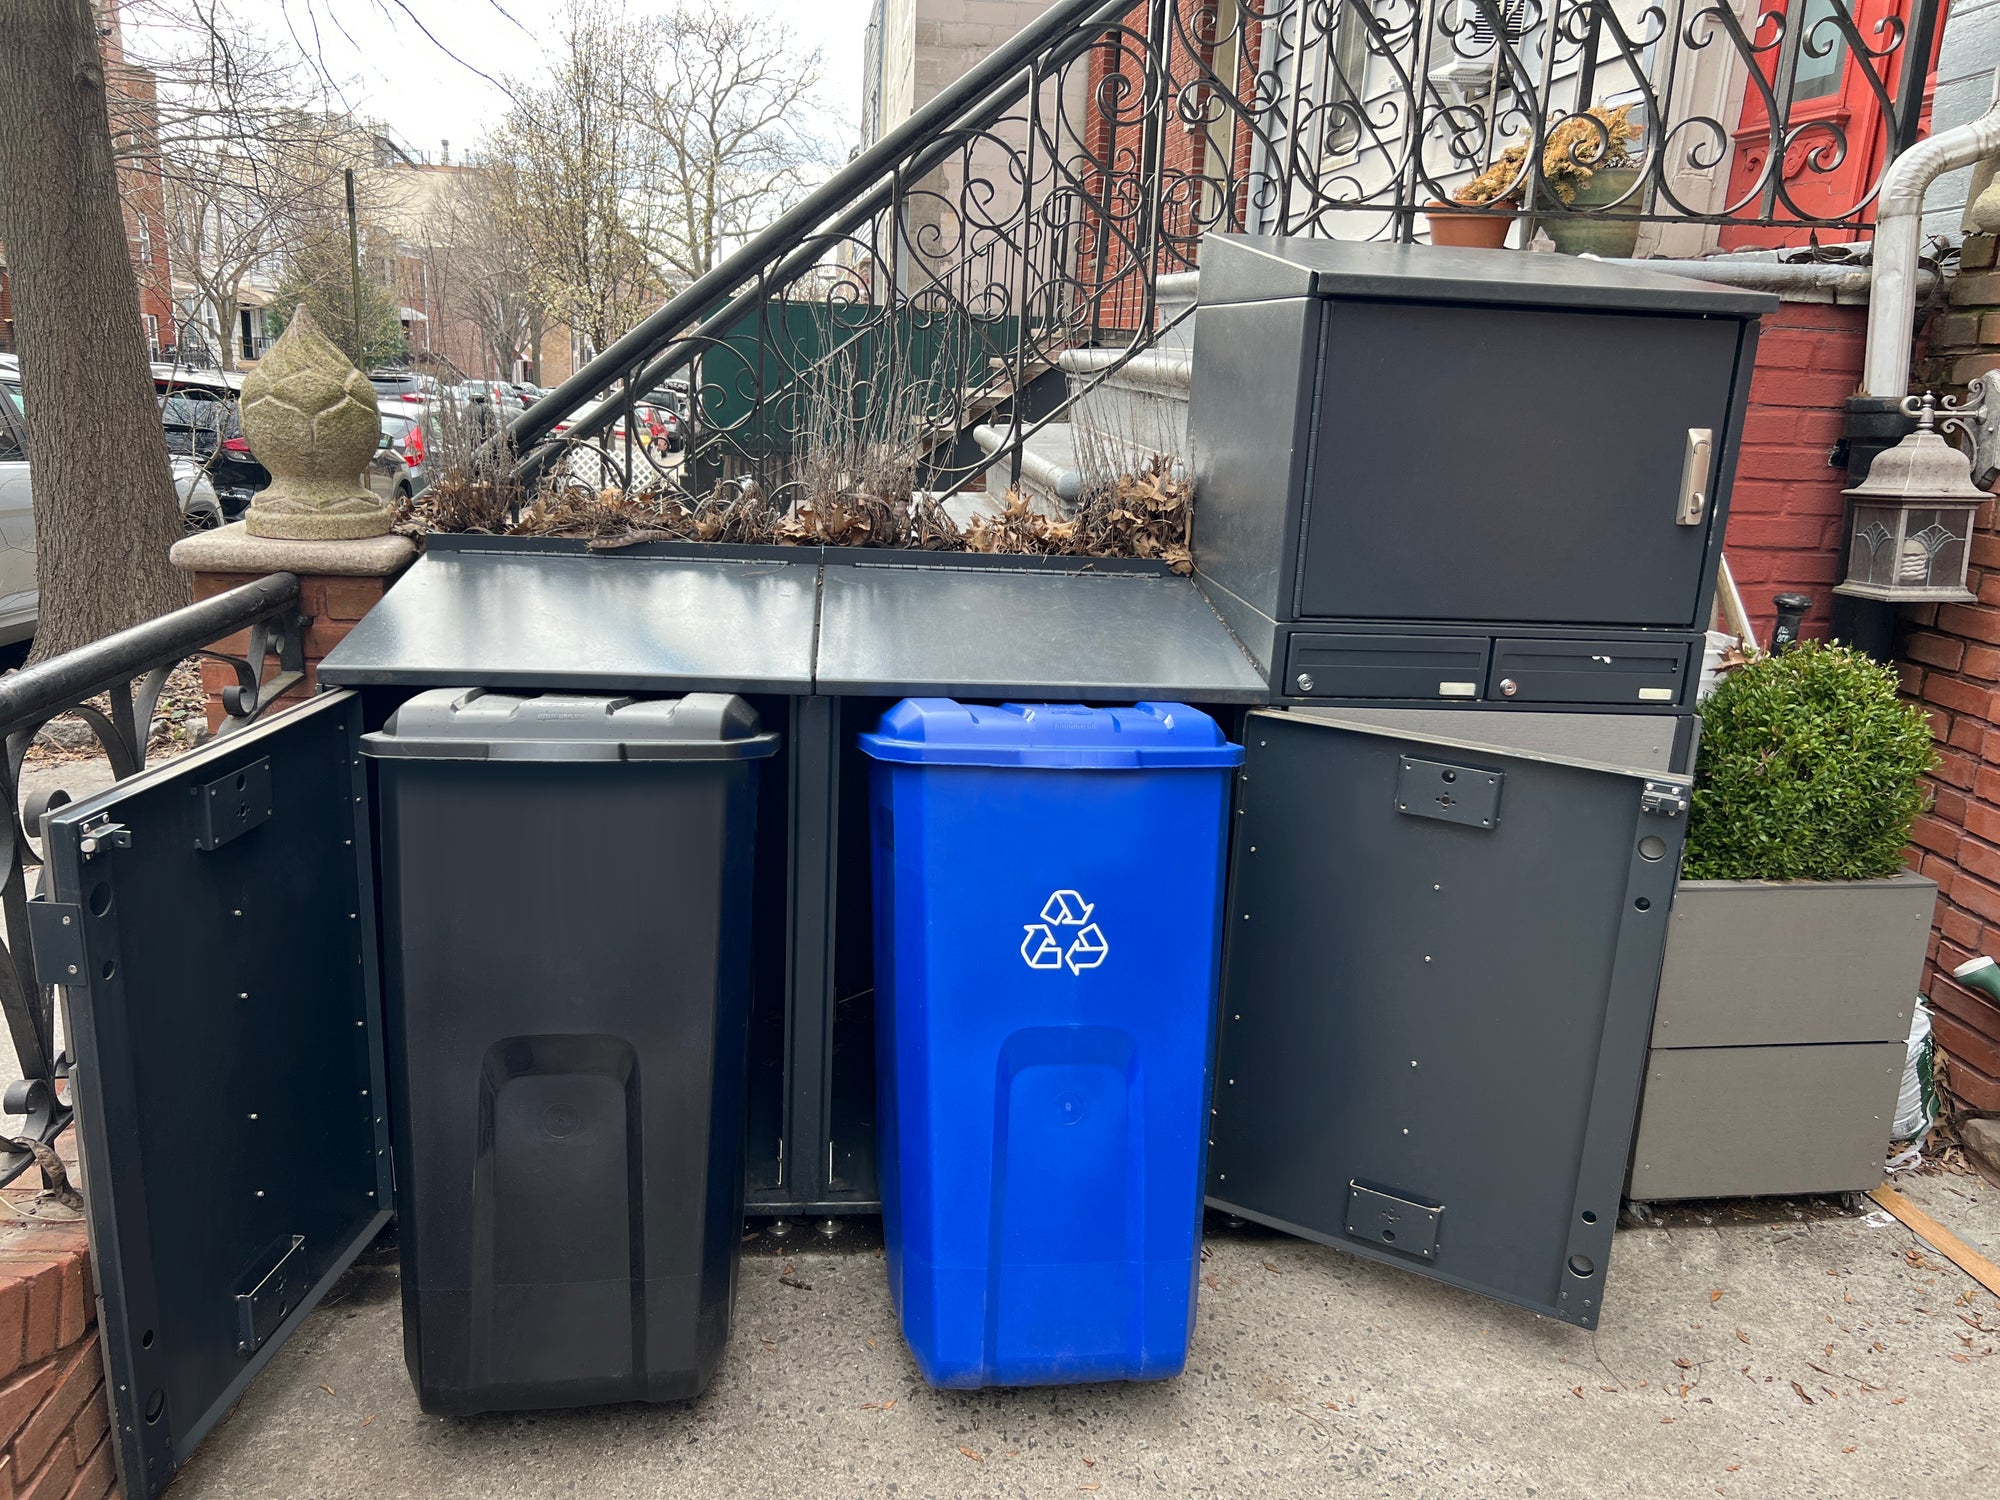 CITIBIN Helps You Comply With New York’s New Garbage Setout Laws